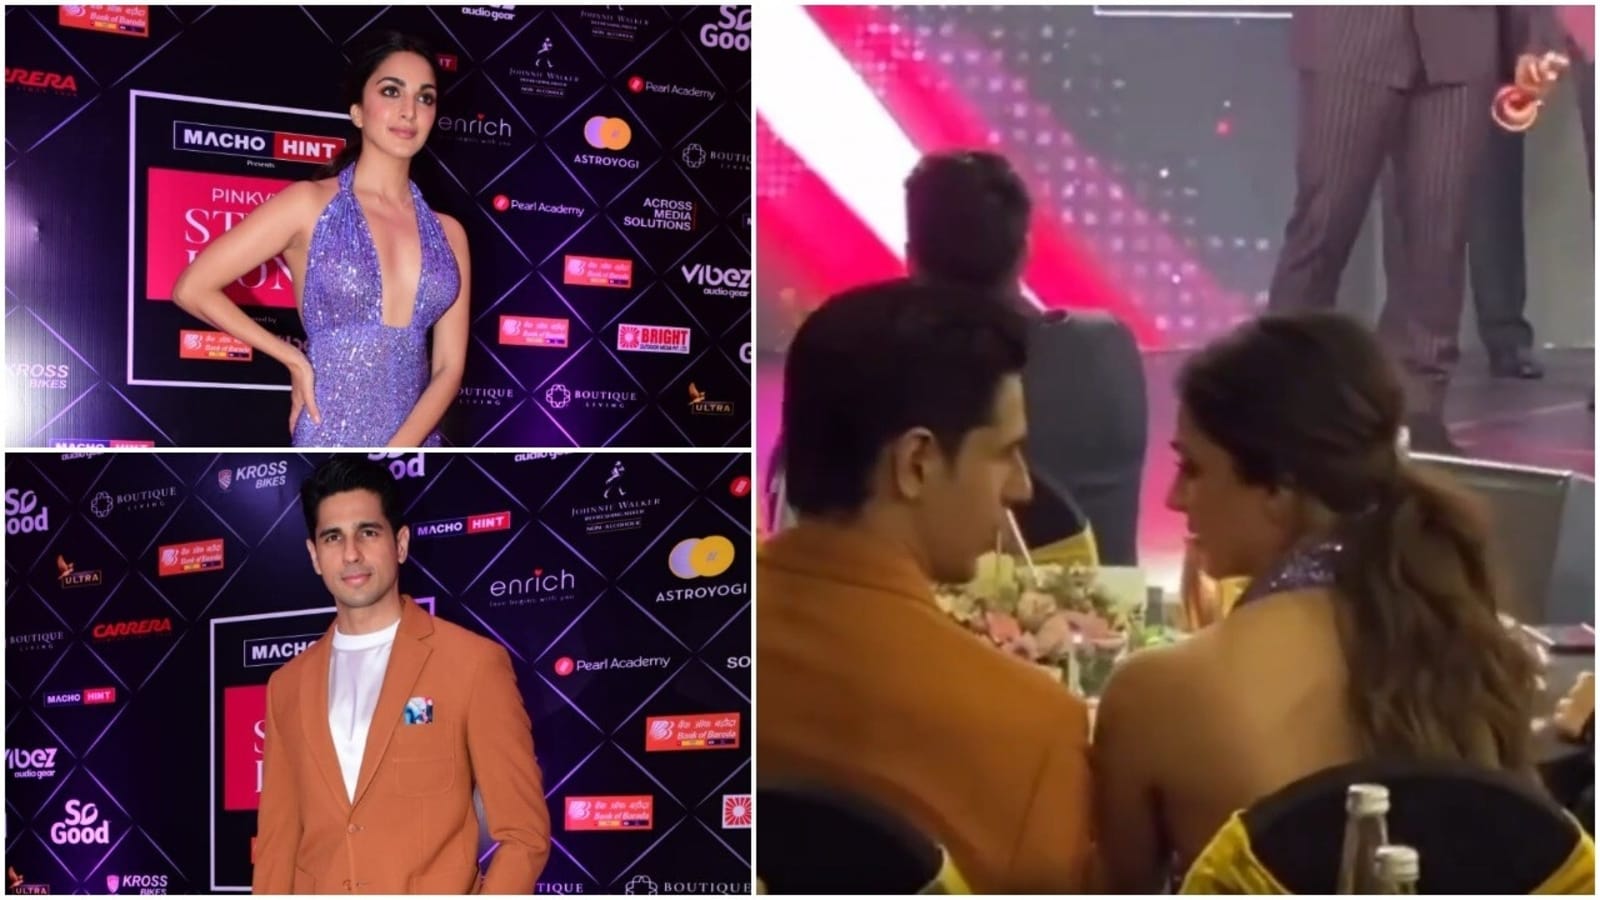 Kiara Advani, Sidharth Malhotra are busy chatting as Arjun Kapoor gives speech at event, fans say ‘lost in own world’